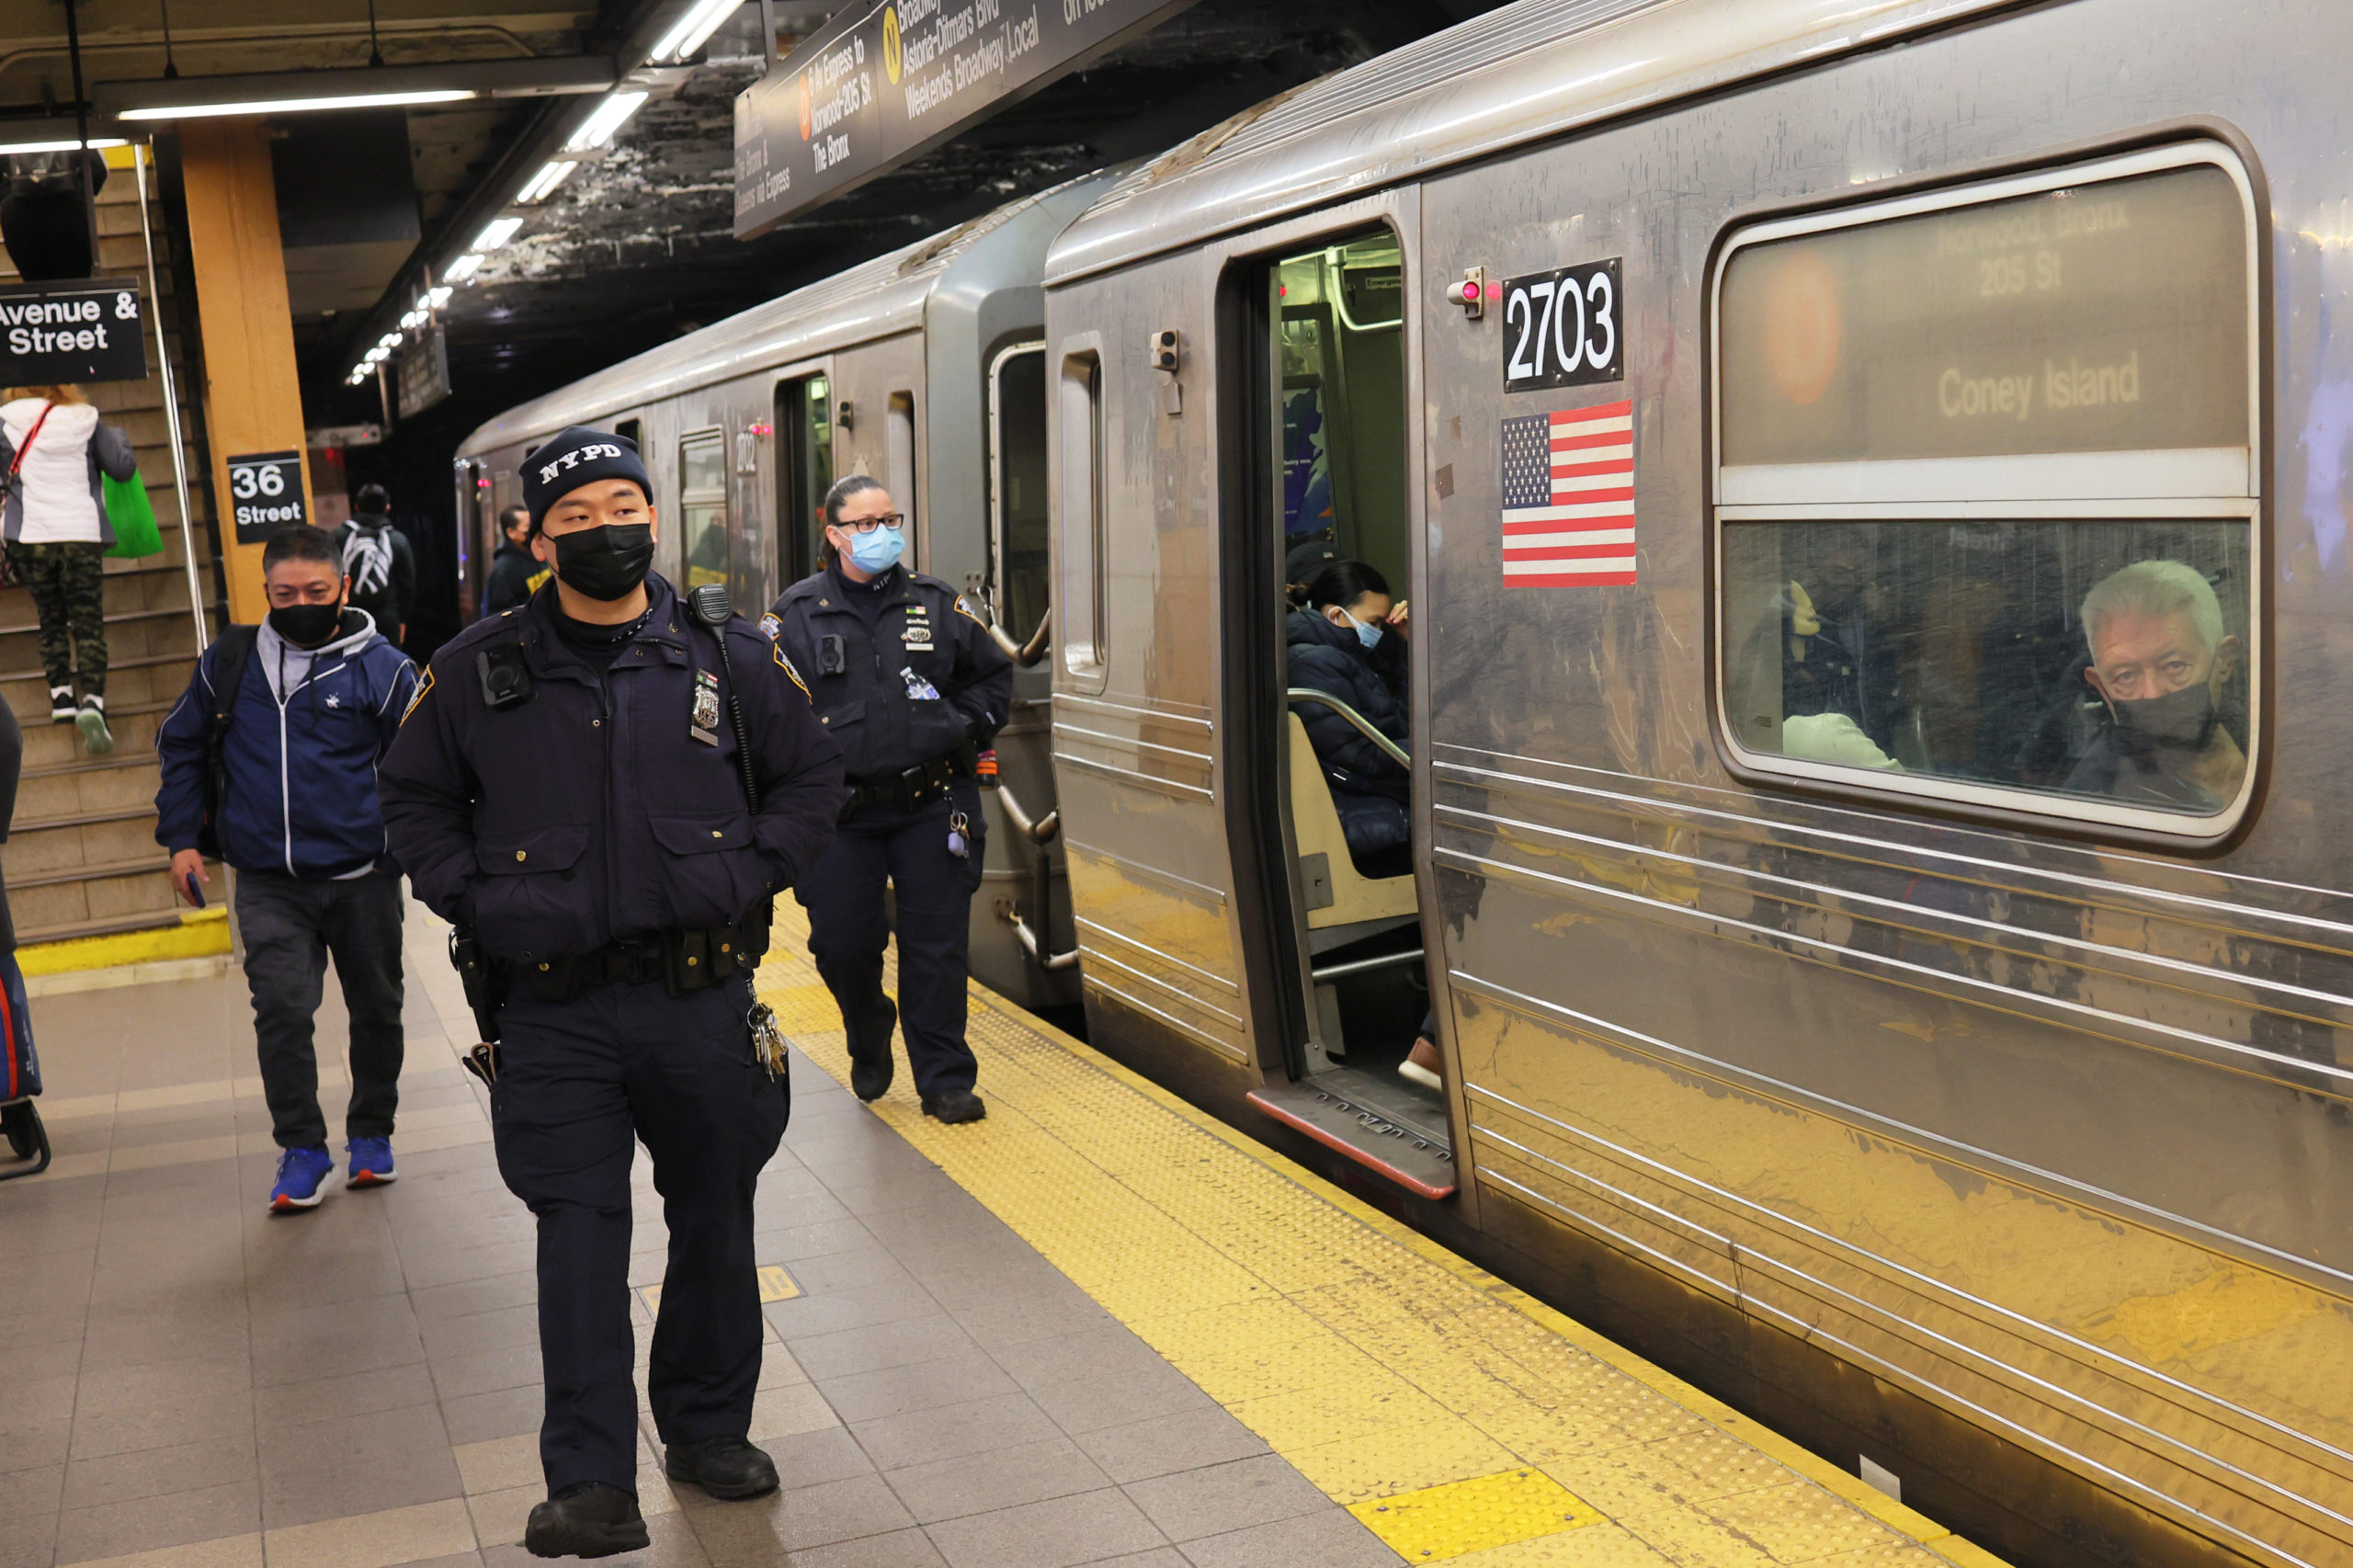 NEW YORK, NEW YORK - APRIL 13: NYPD officers patrol the subway platform at the 36 Street subway station on April 13, 2022 in the Sunset Park neighborhood of Brooklyn in New York City. A manhunt is underway for a gunman who shot 10 people, critically injuring five on the N train during Tuesday's morning rush hour. The suspect, wearing a gas mask, tossed smoke grenades on the floor and fired 33 shots before leaving the scene. At least 13 other commuters suffered injuries due to smoke inhalation, falls, and panic attacks. The police on Tuesday evening named a "person of interest" in the mass shooting and believe that they have found his personal belongings left on the train that includes a Glock 9-millimeter handgun and a key to a U-Haul van. Mayor Eric Adams this morning announced that Frank James, the "person of interest" is now considered a suspect. (Photo by Michael M. Santiago/Getty Images)